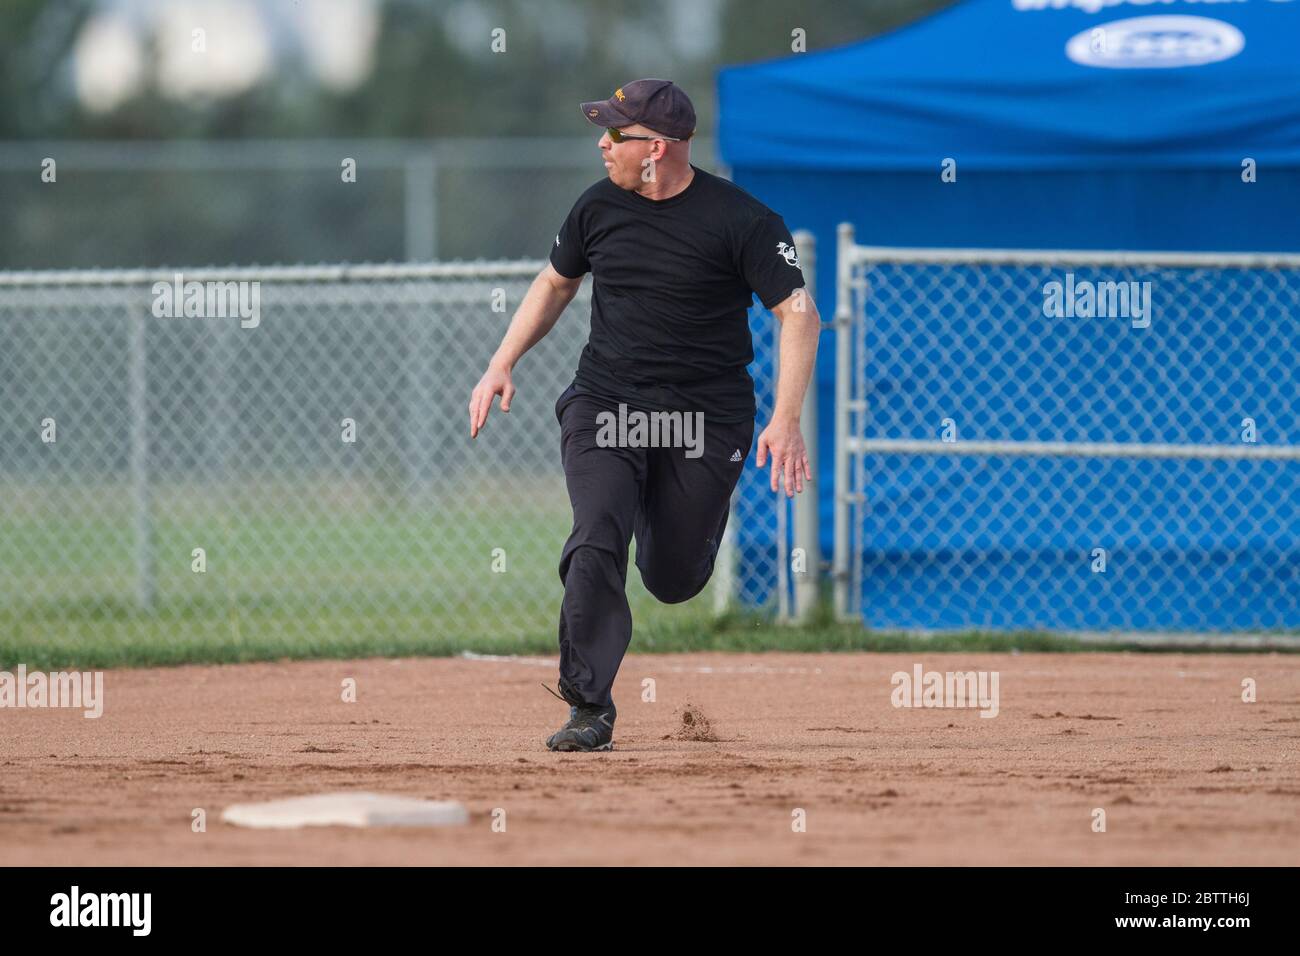 Playing in a mixed slo pitch softball game, male running to second base. Stock Photo